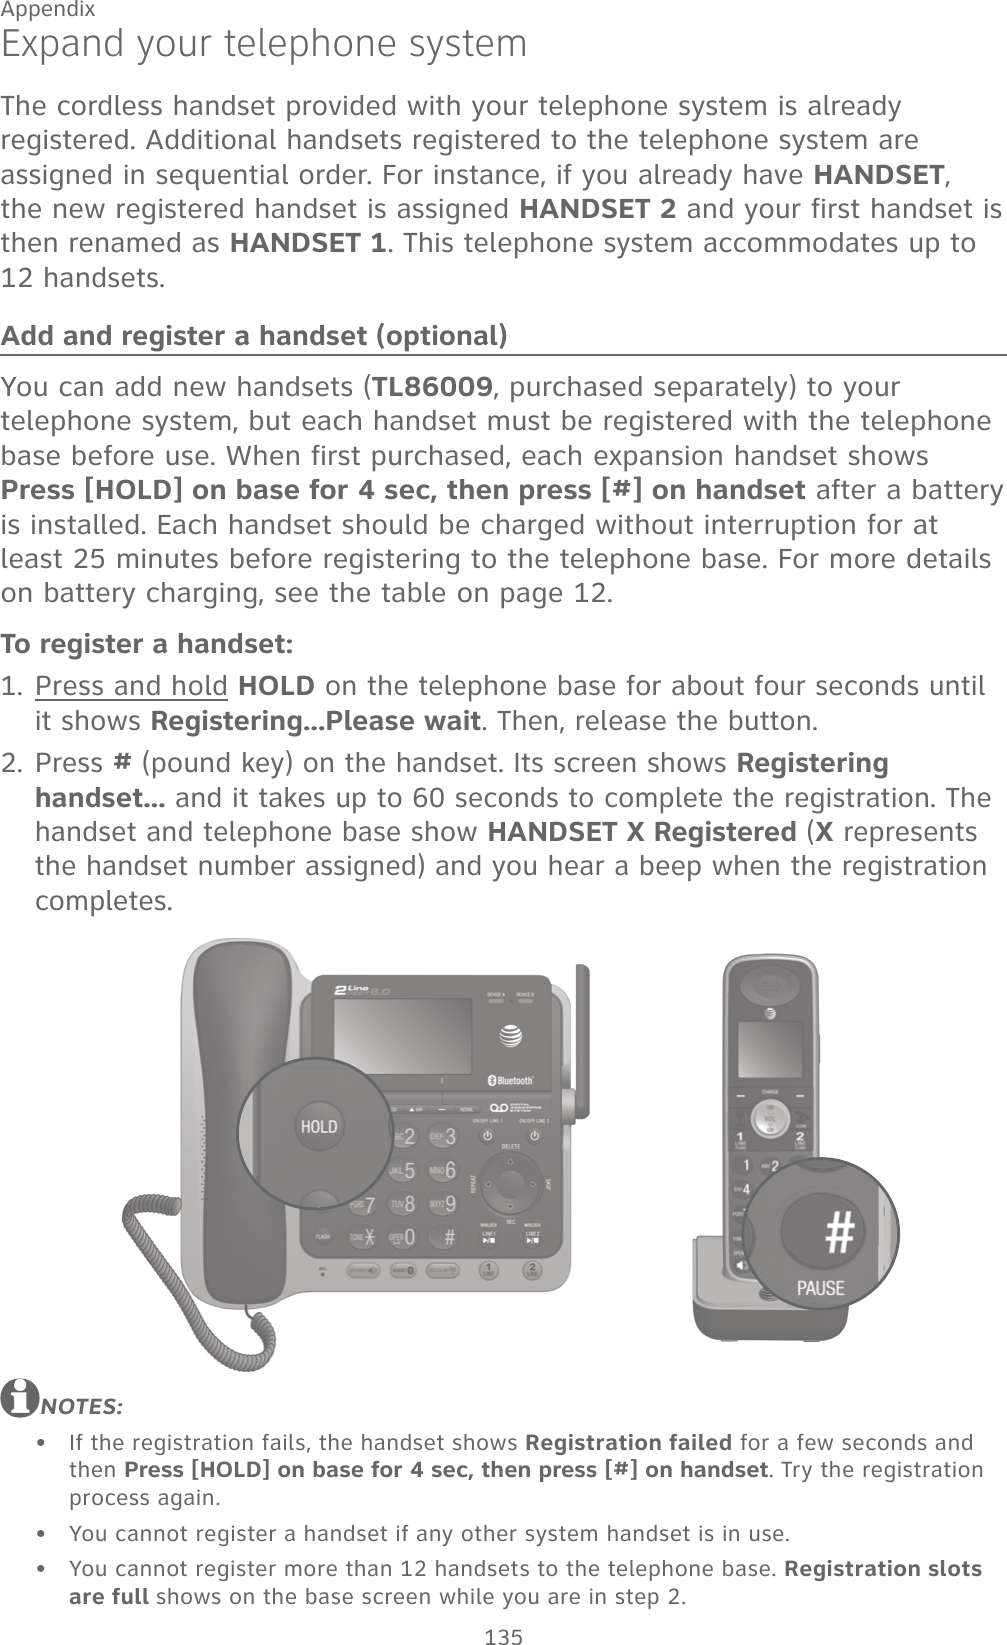 135AppendixExpand your telephone systemThe cordless handset provided with your telephone system is already registered. Additional handsets registered to the telephone system are assigned in sequential order. For instance, if you already have HANDSET, the new registered handset is assigned HANDSET 2 and your first handset is then renamed as HANDSET 1. This telephone system accommodates up to 12 handsets.Add and register a handset (optional)You can add new handsets (TL86009, purchased separately) to your telephone system, but each handset must be registered with the telephone base before use. When first purchased, each expansion handset shows  Press [HOLD] on base for 4 sec, then press [#] on handset after a battery is installed. Each handset should be charged without interruption for at least 25 minutes before registering to the telephone base. For more details on battery charging, see the table on page 12.To register a handset:Press and hold HOLD on the telephone base for about four seconds until it shows Registering...Please wait. Then, release the button.Press # (pound key) on the handset. Its screen shows Registering handset... and it takes up to 60 seconds to complete the registration. The handset and telephone base show HANDSET X Registered (X represents the handset number assigned) and you hear a beep when the registration completes.NOTES:If the registration fails, the handset shows Registration failed for a few seconds and then Press [HOLD] on base for 4 sec, then press [#] on handset. Try the registration  process again.You cannot register a handset if any other system handset is in use.You cannot register more than 12 handsets to the telephone base. Registration slots are full shows on the base screen while you are in step 2.1.2.•••